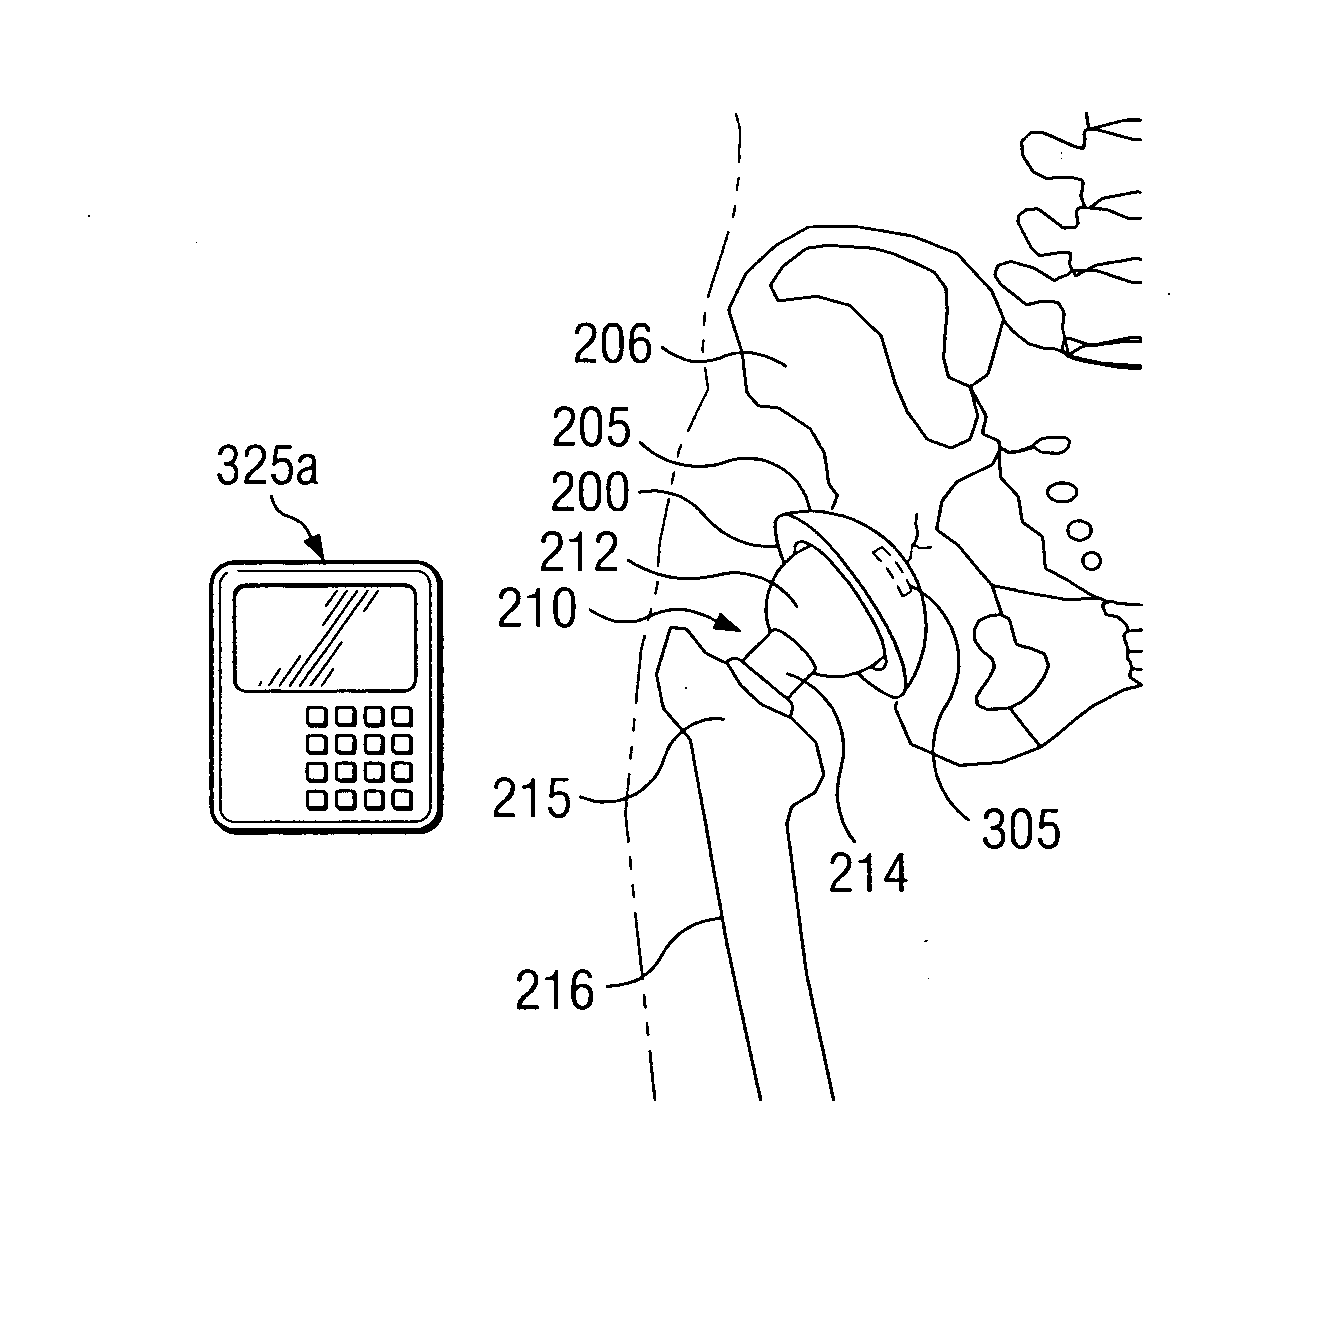 Methods for detecting osteolytic conditions in the body